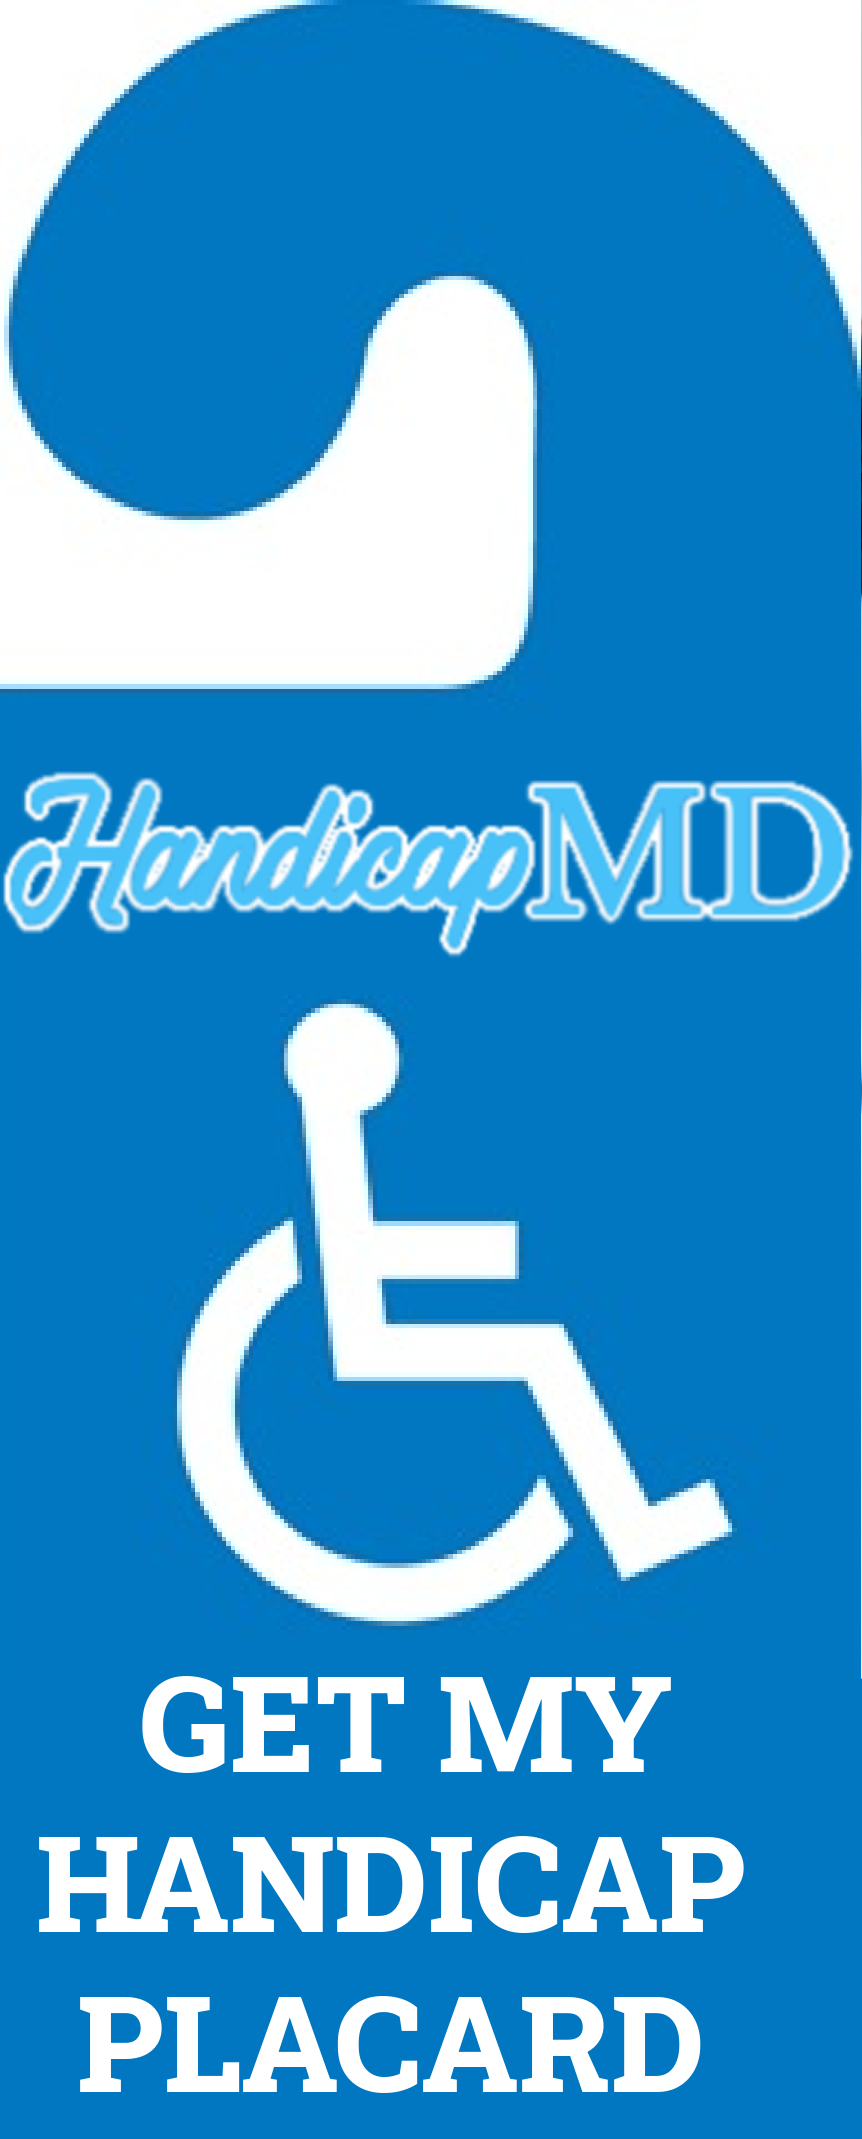 Handicap Placard Violations and Penalties in Rhode Island: What You Need to Know